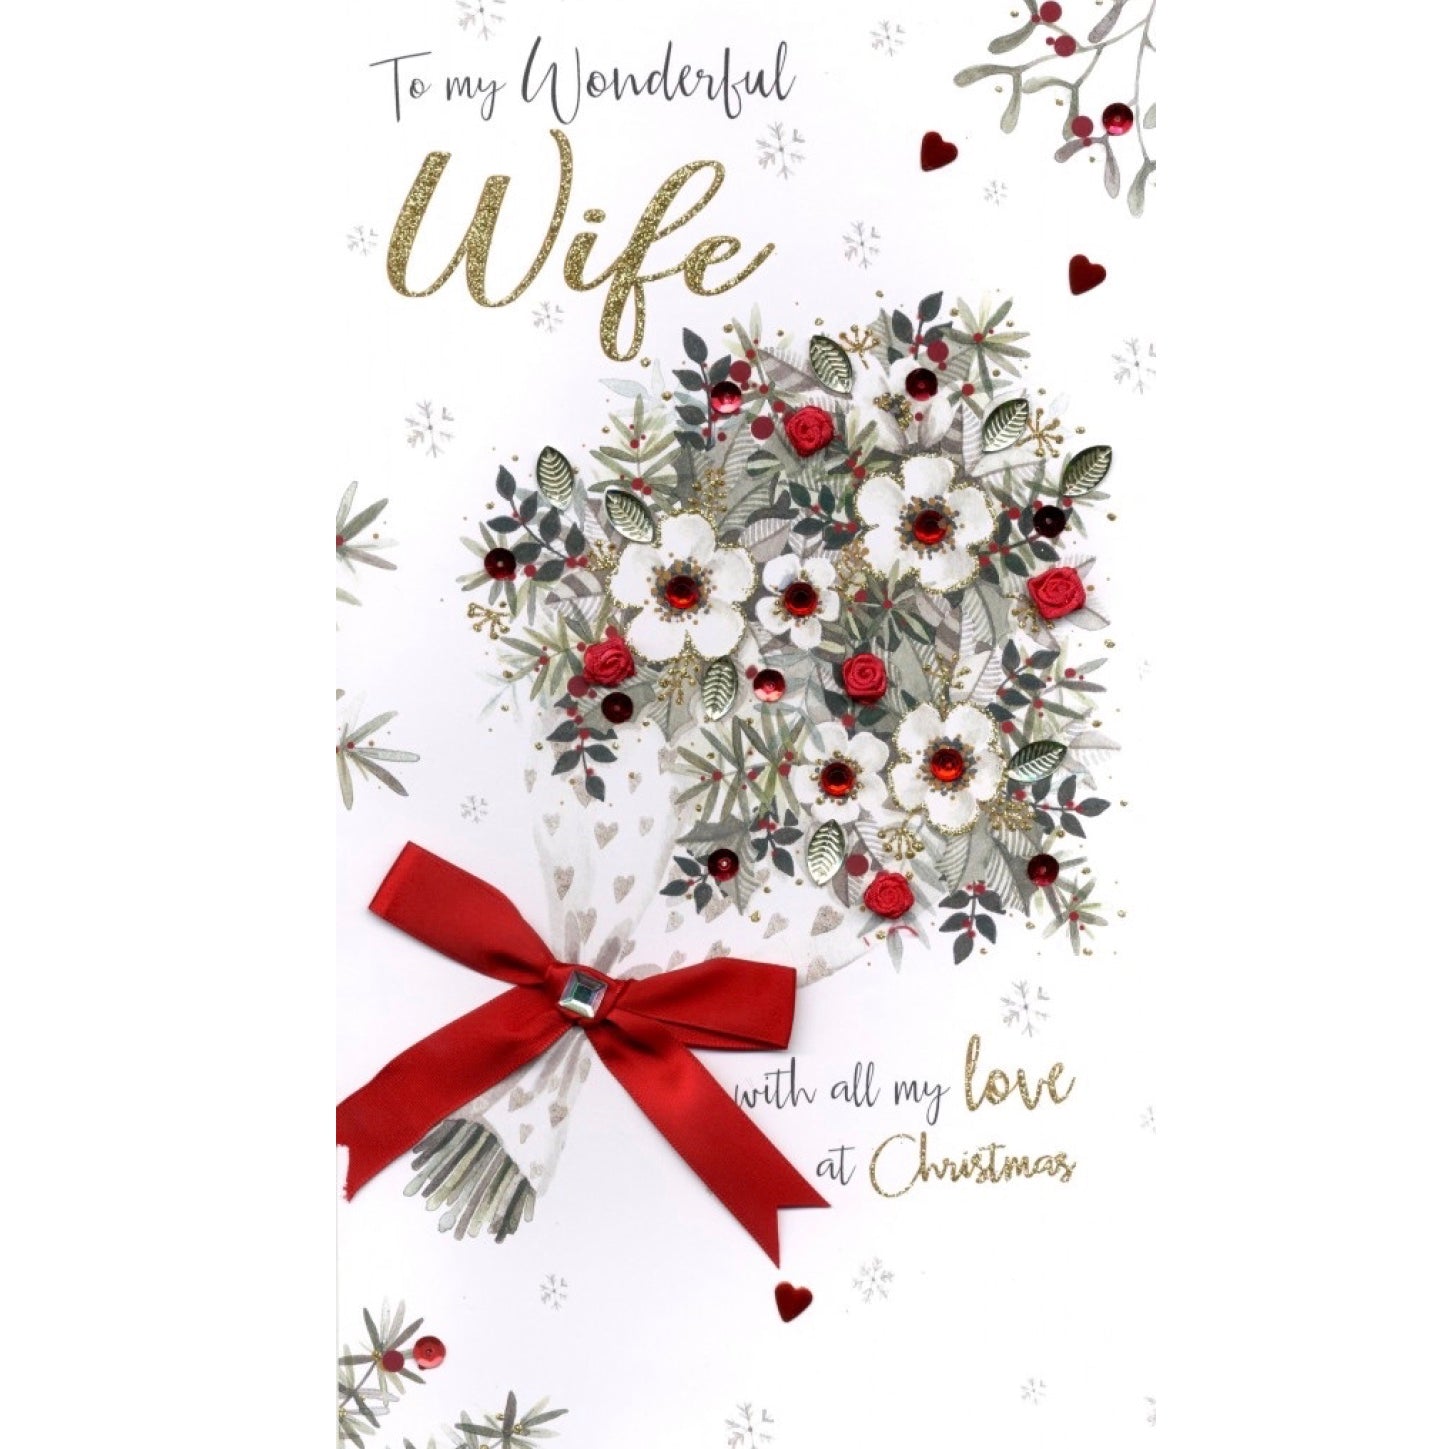 "To my Wonderful Wife" Bouquet Luxury Christmas Greeting Card